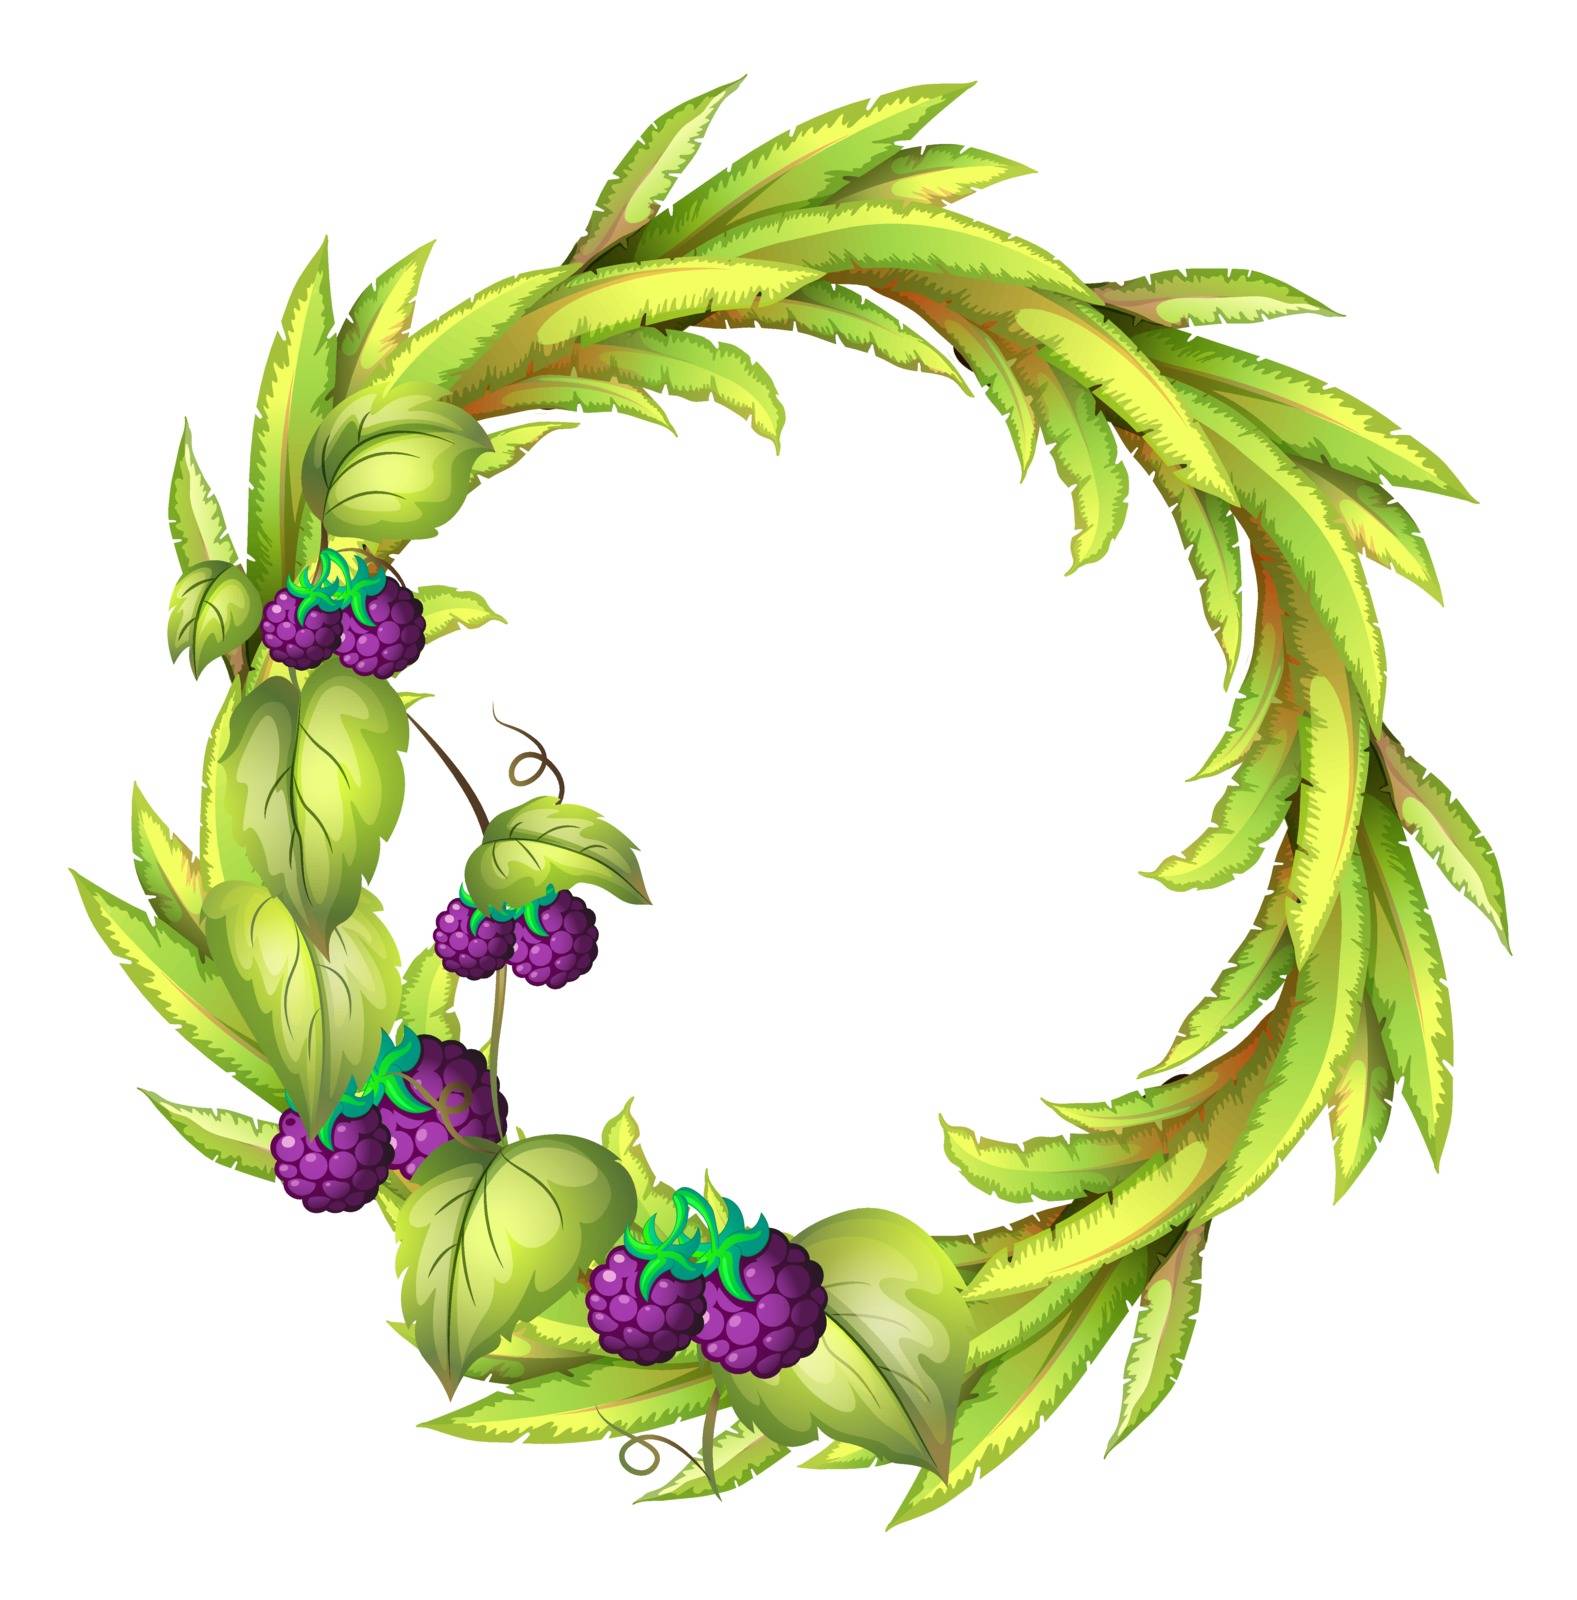 Illustration of a round frame with violet berries on a white background